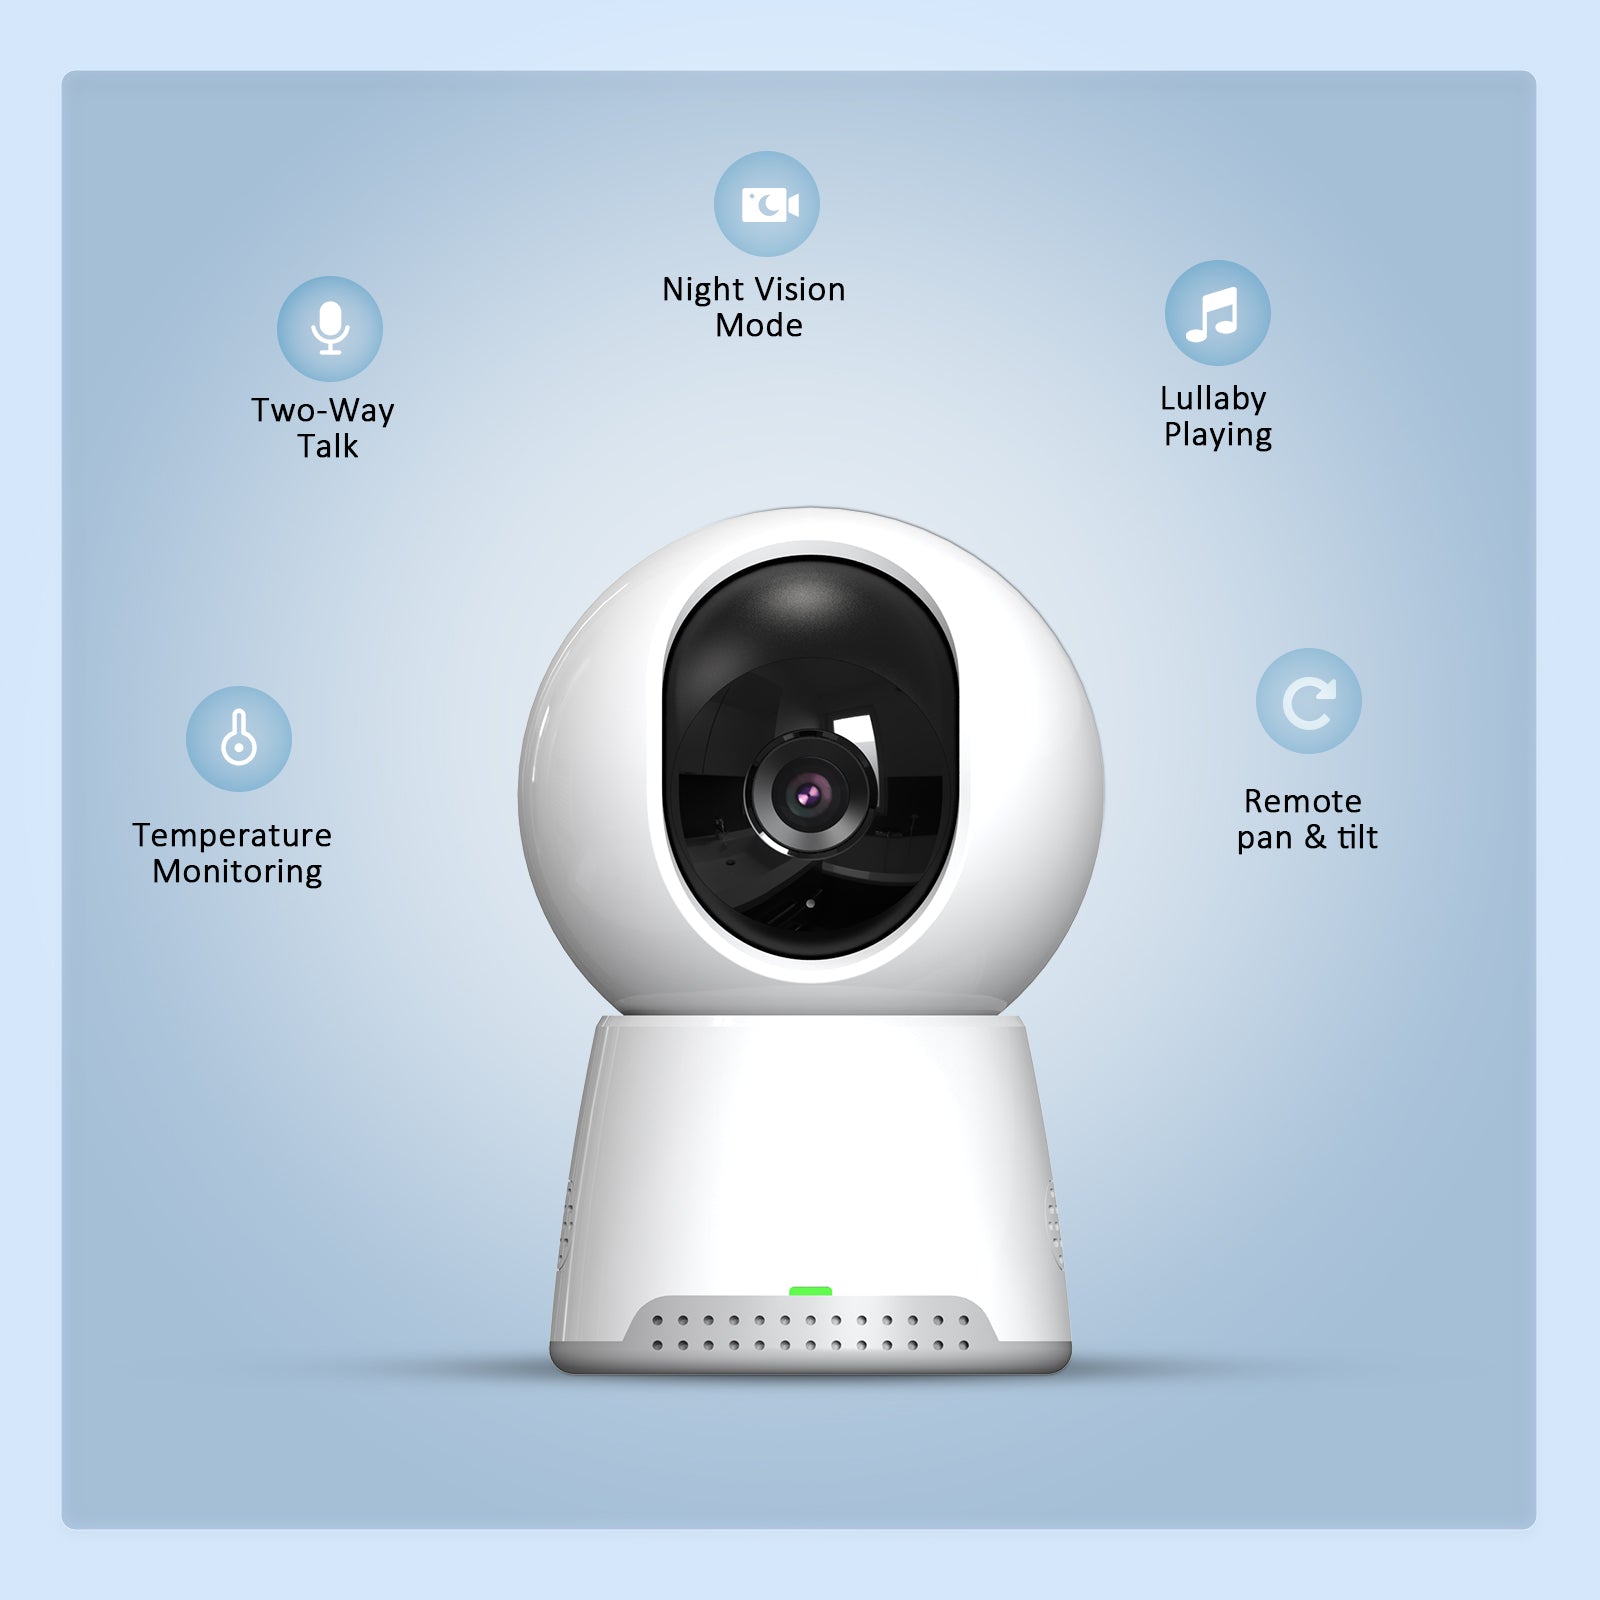 Baby camera features Night Vision, Two-Way Talk, Temperature Monitoring, and more